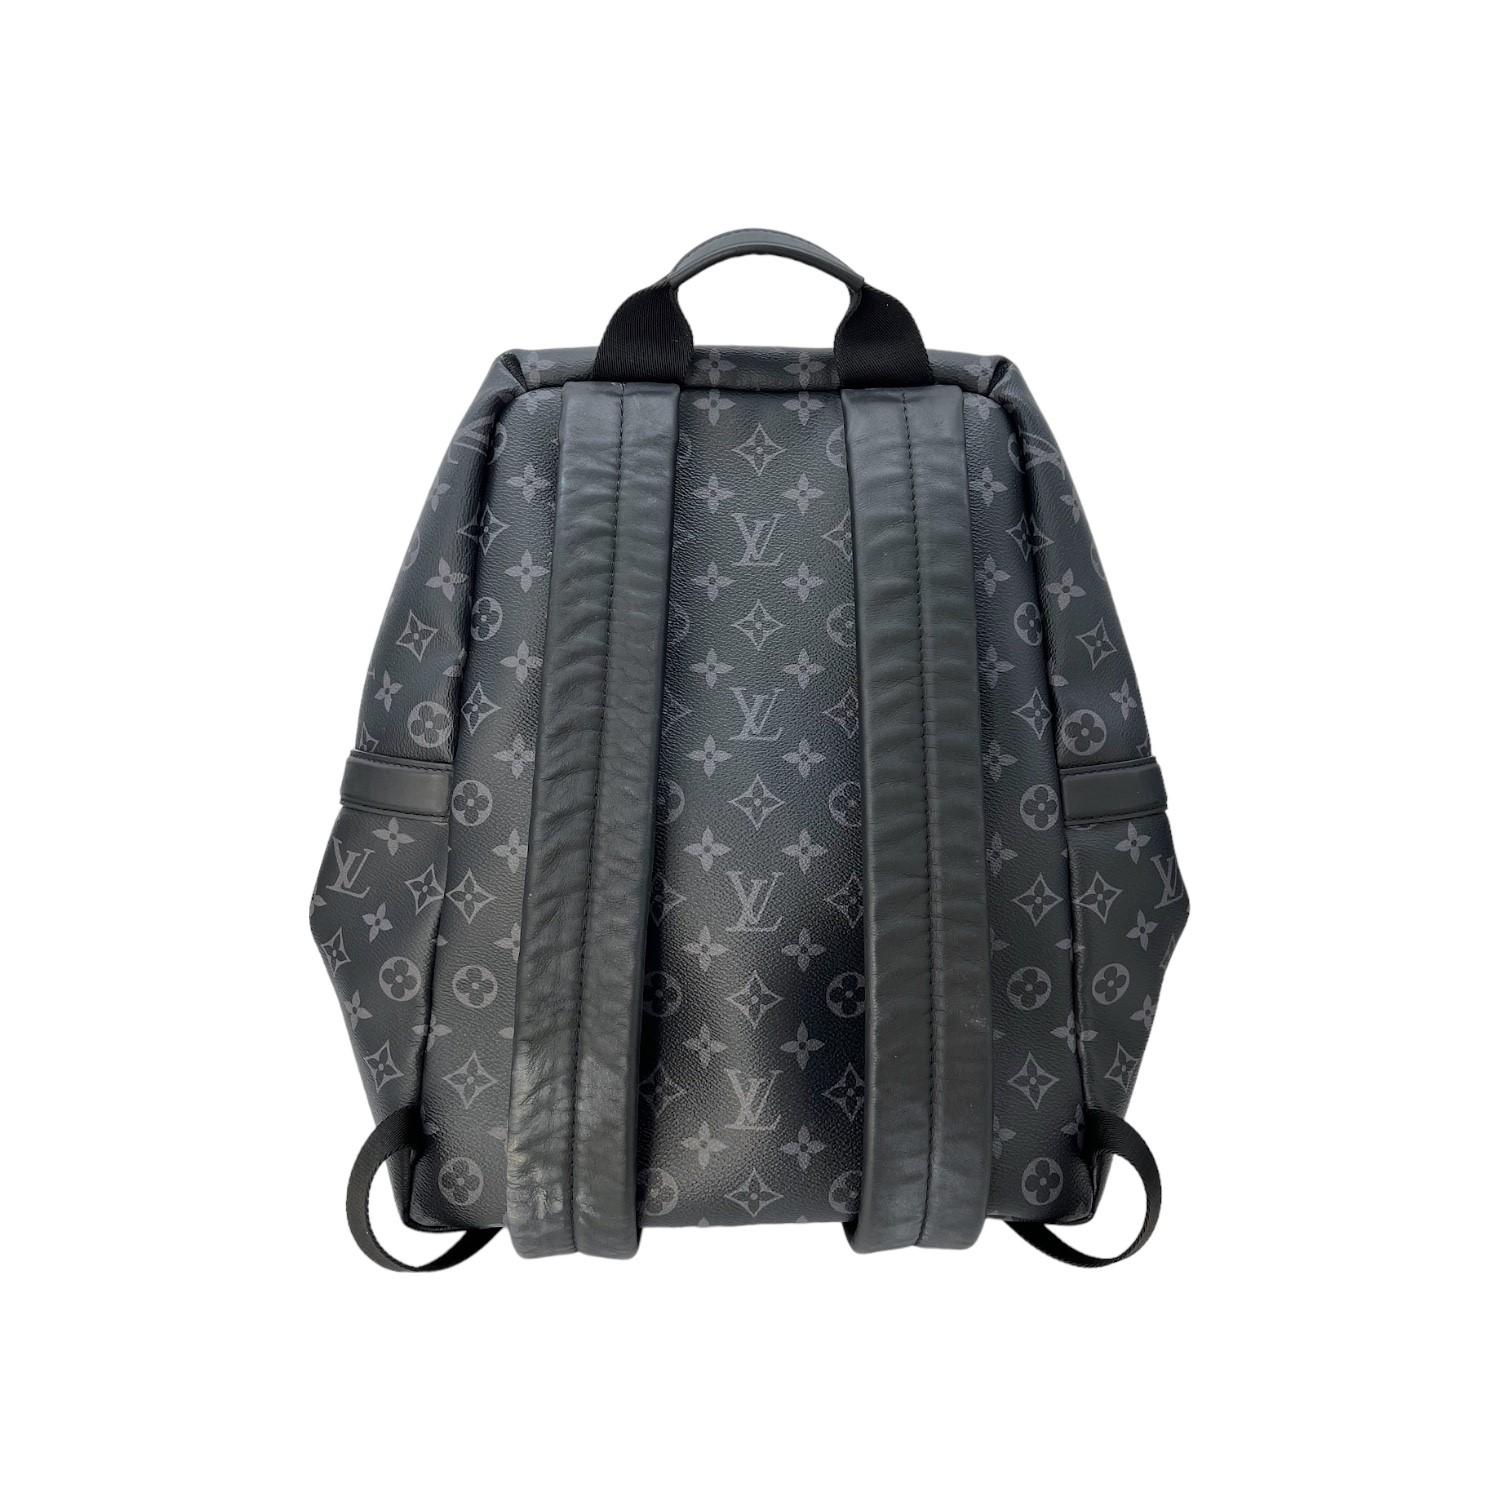 This Louis Vuitton Discovery Backpack was made in France and it is finely crafted of the Louis Vuitton Monogram Eclipse coated canvas with leather trimming and silver-tone hardware features. It has a frontal slip pocket with a magnetic closure along